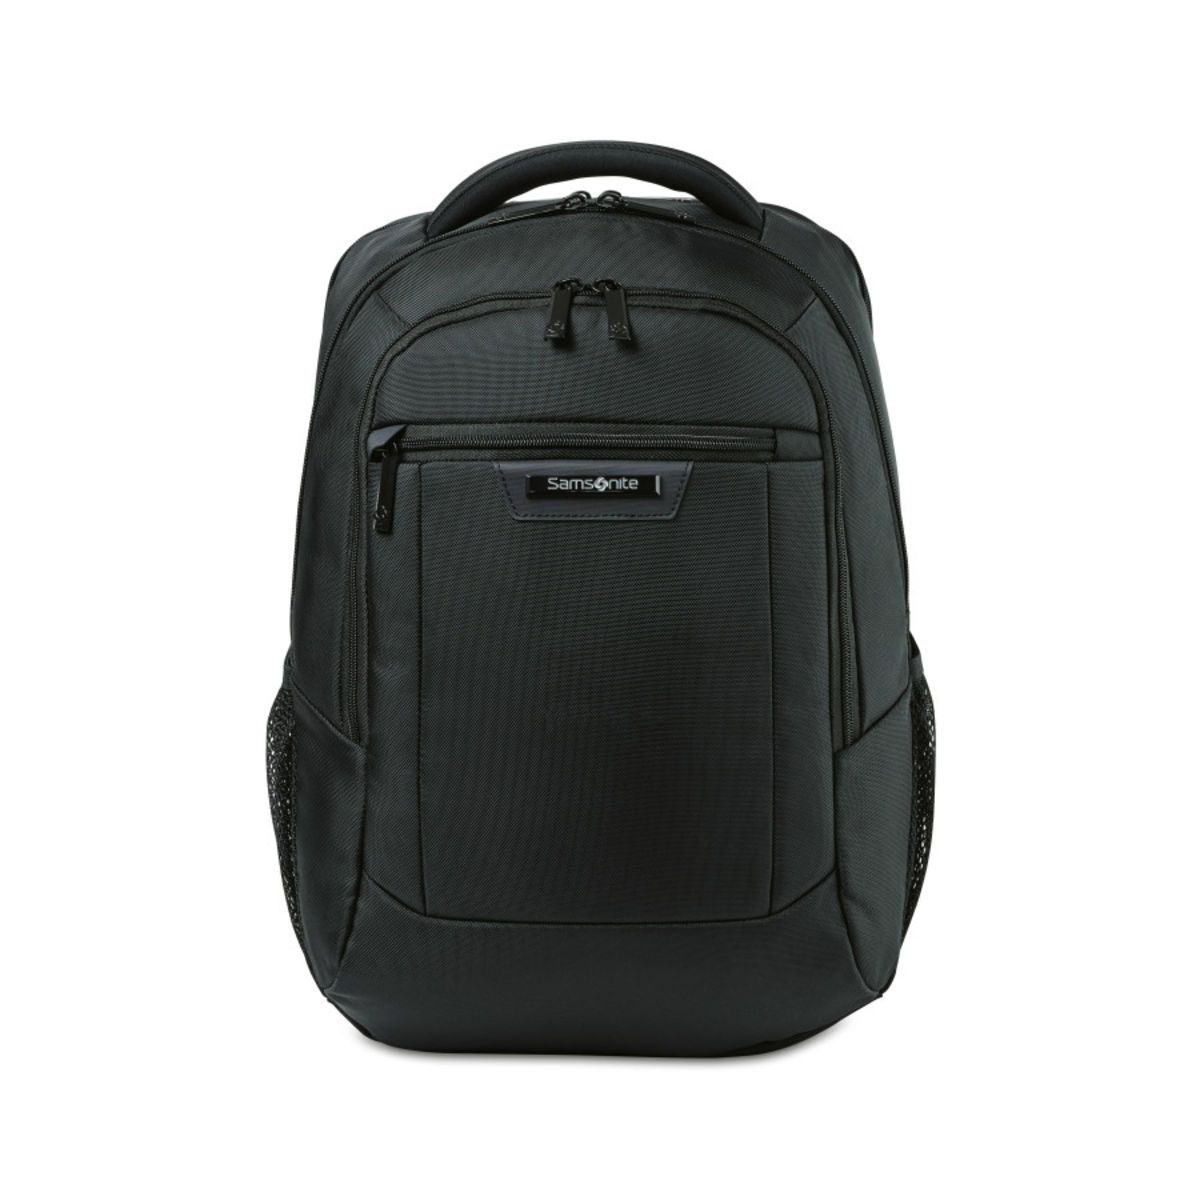 Samsonite Classic Business Perfect Fit Computer Backpack